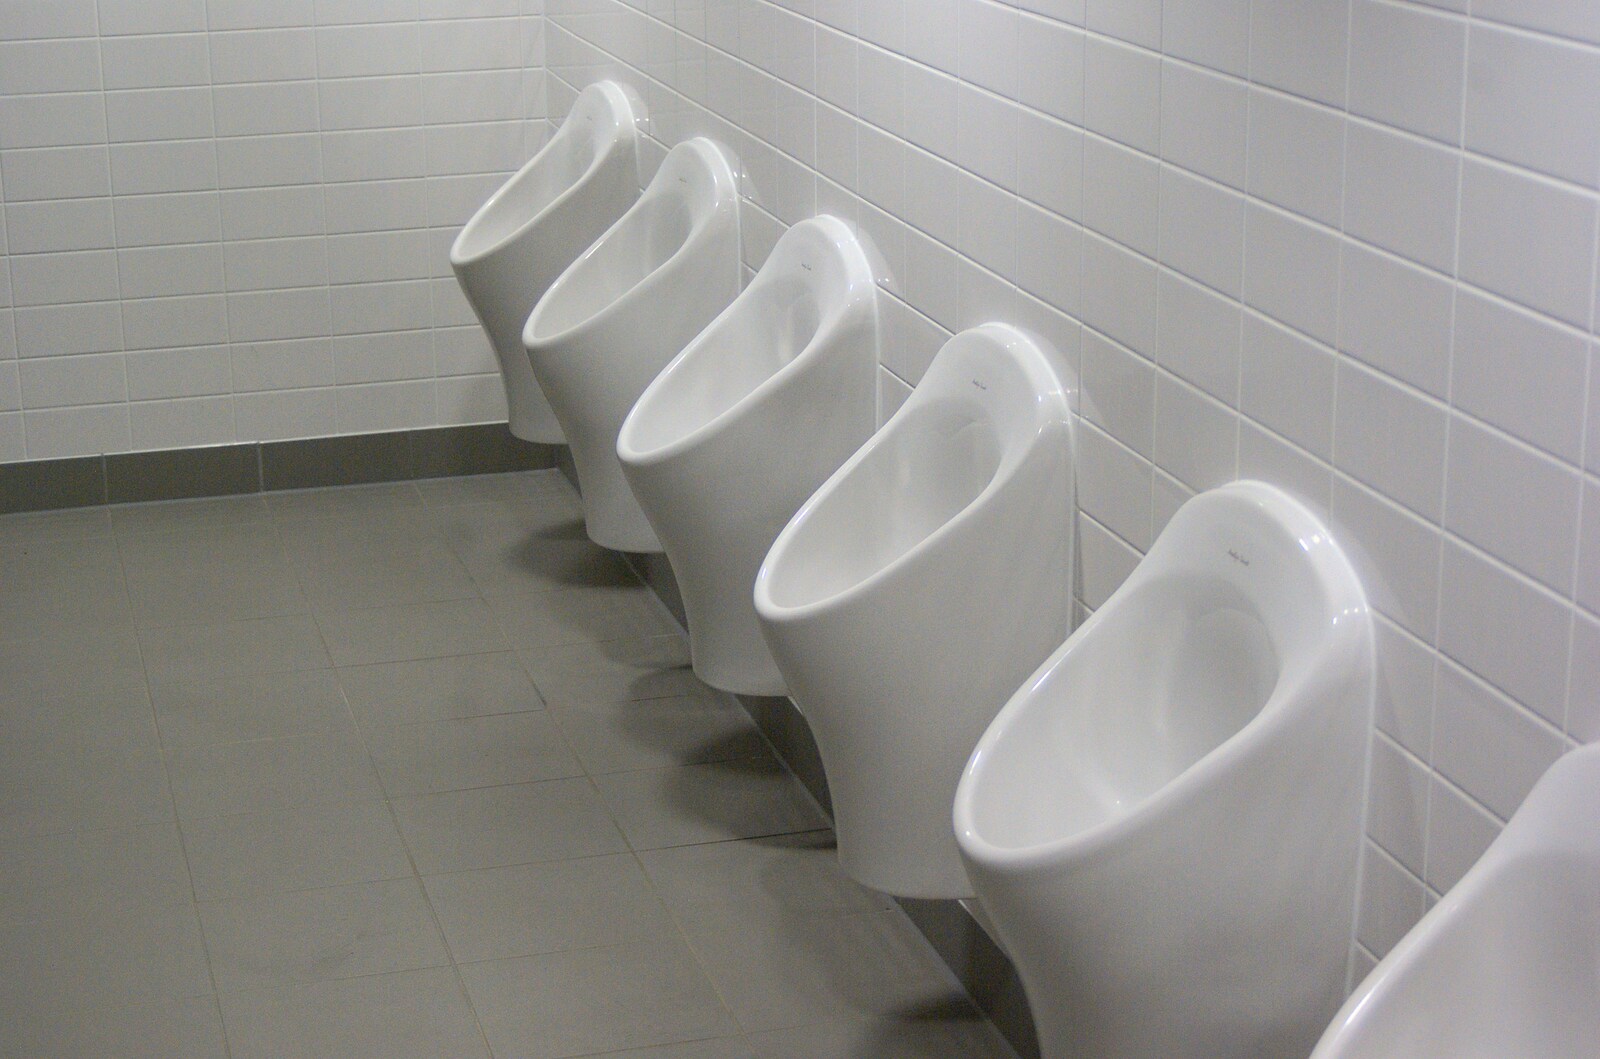 Funky Silverstone urinals from TouchType at Silverstone, Northamptonshire - 22nd October 2011